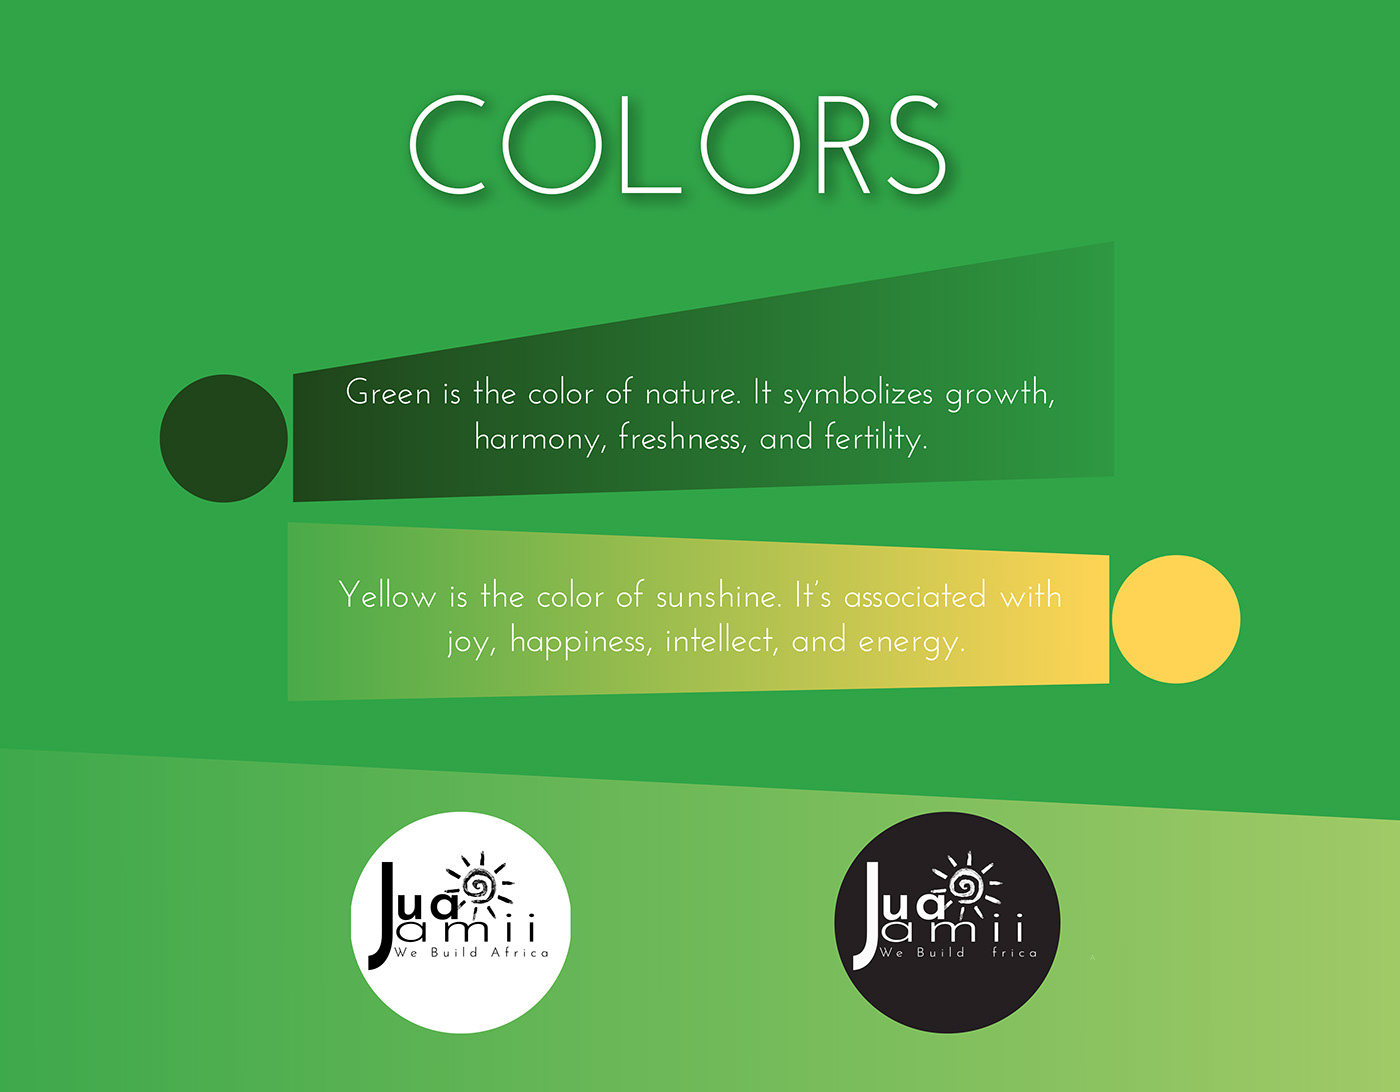 Colors, green for nature symbolizes growth, yellow color of sunshine, joy and happiness 